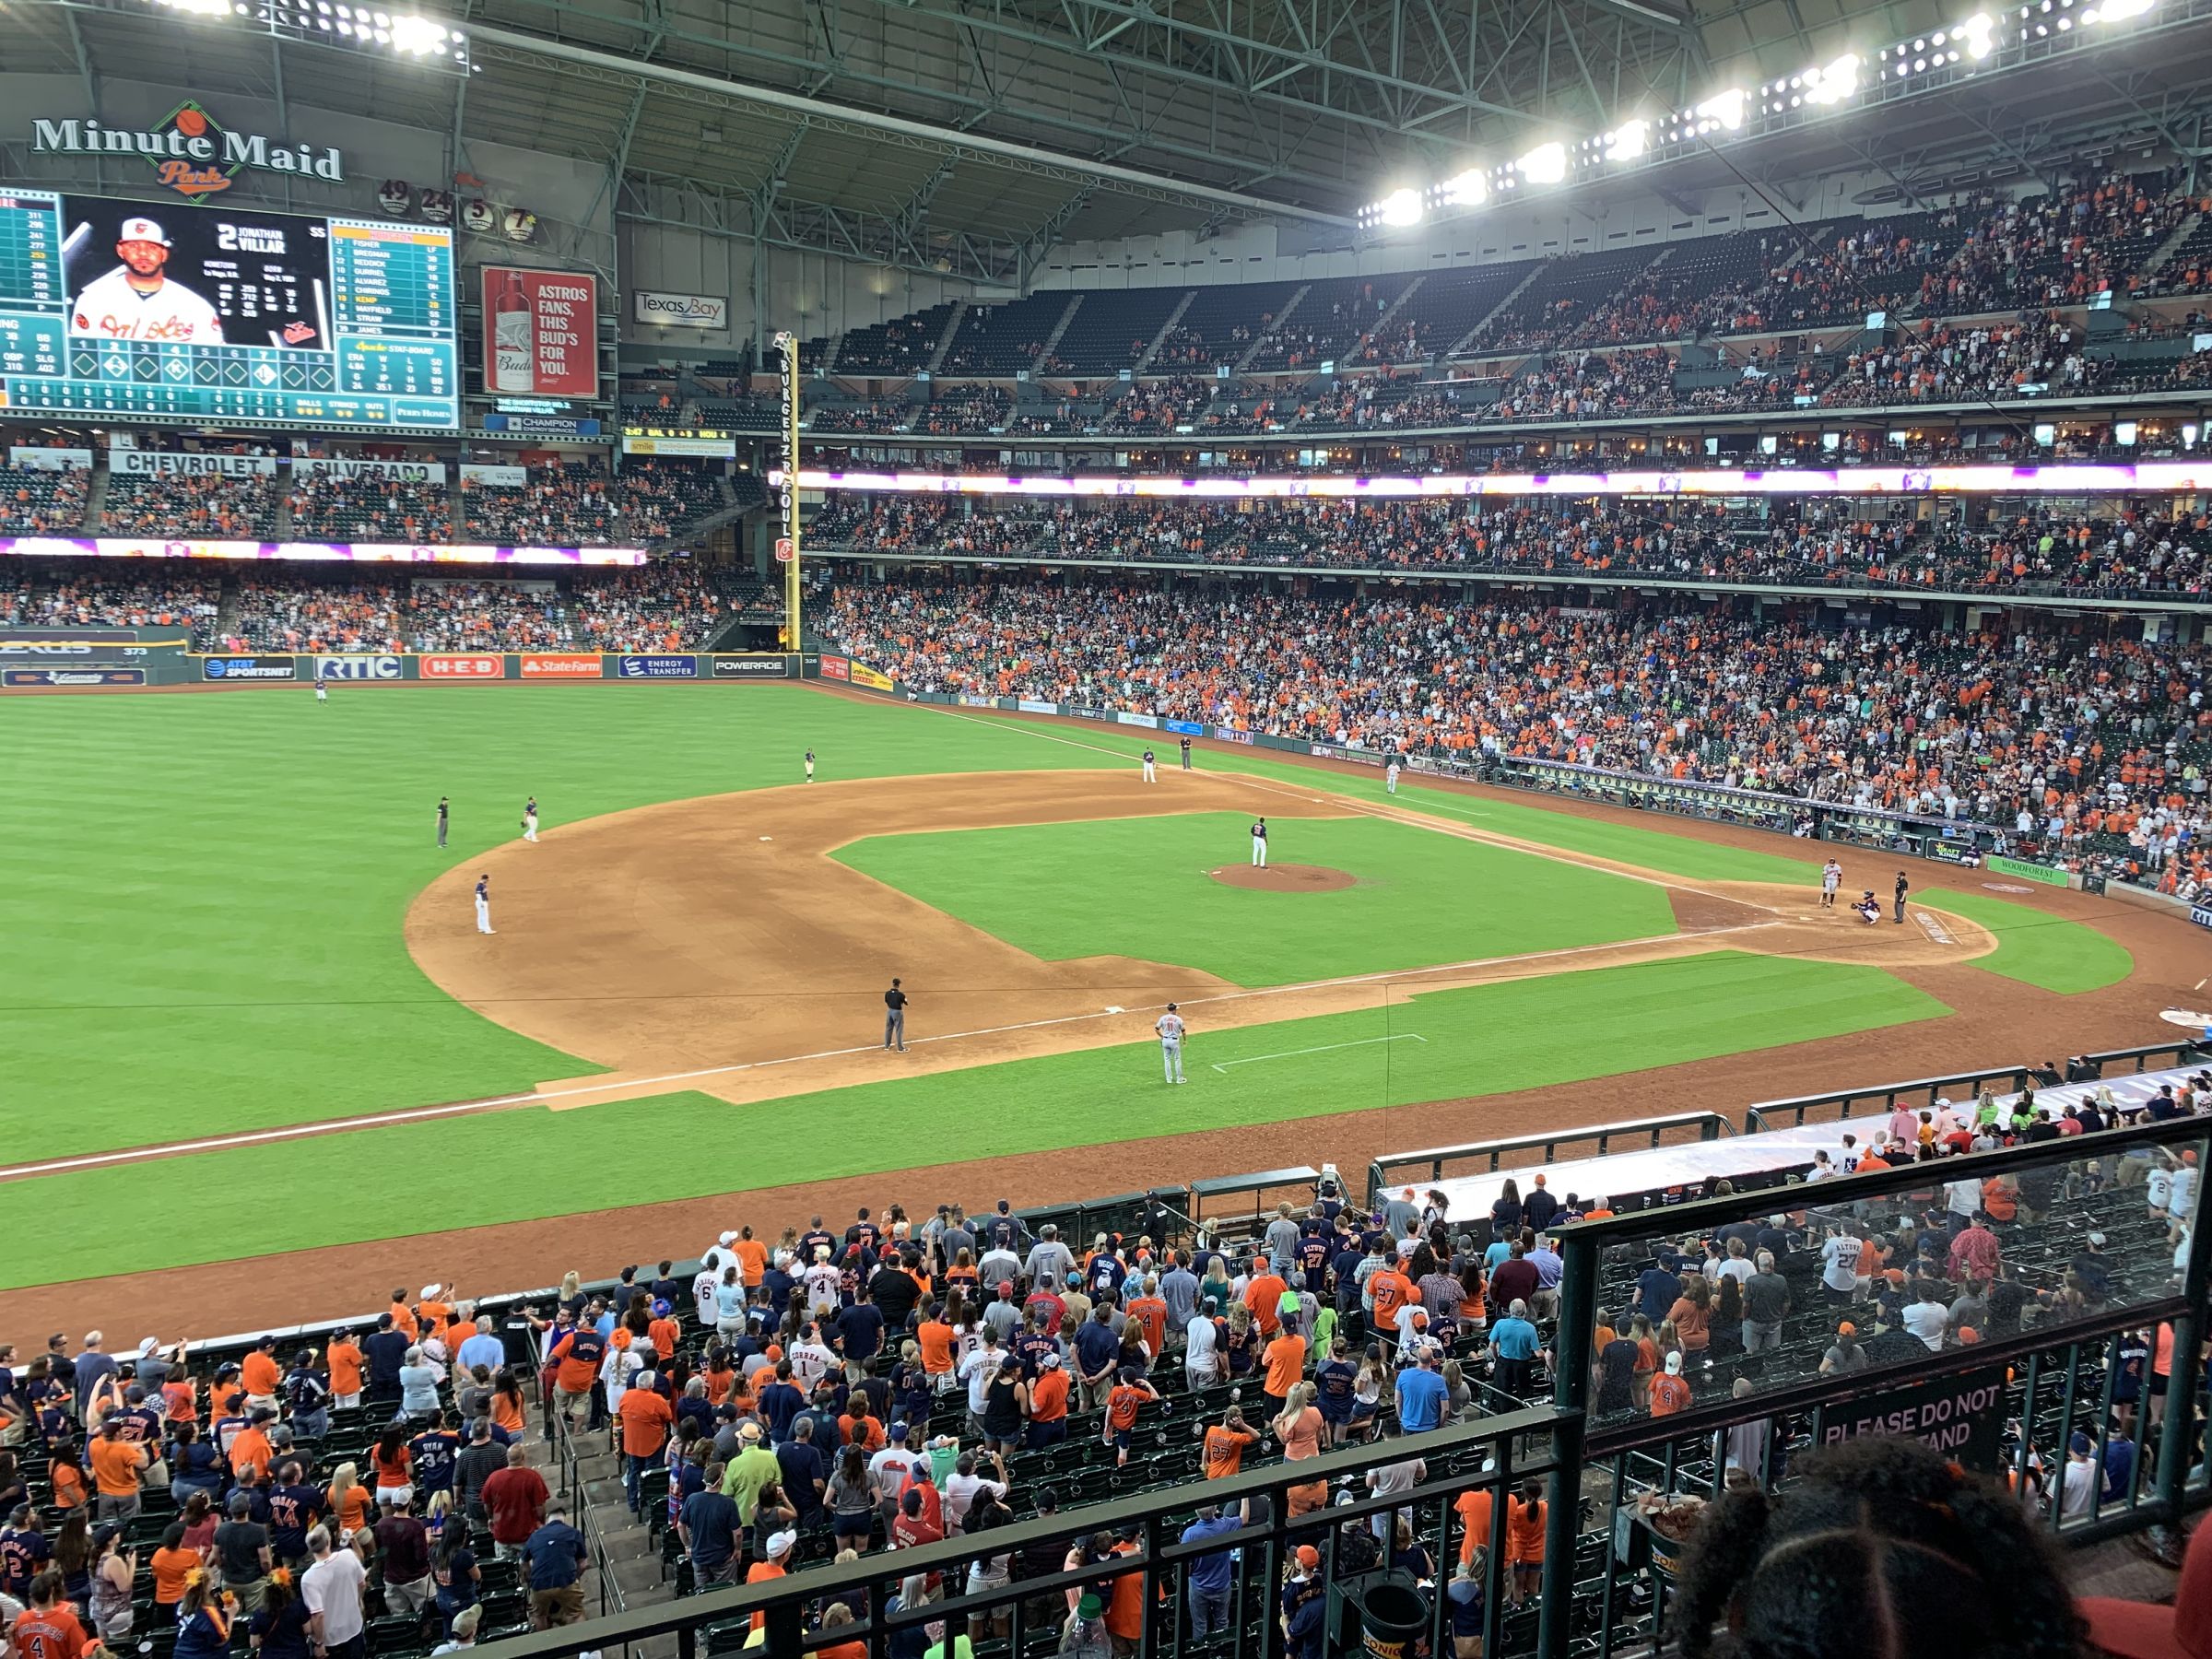 section 210, row 3 seat view  for baseball - minute maid park